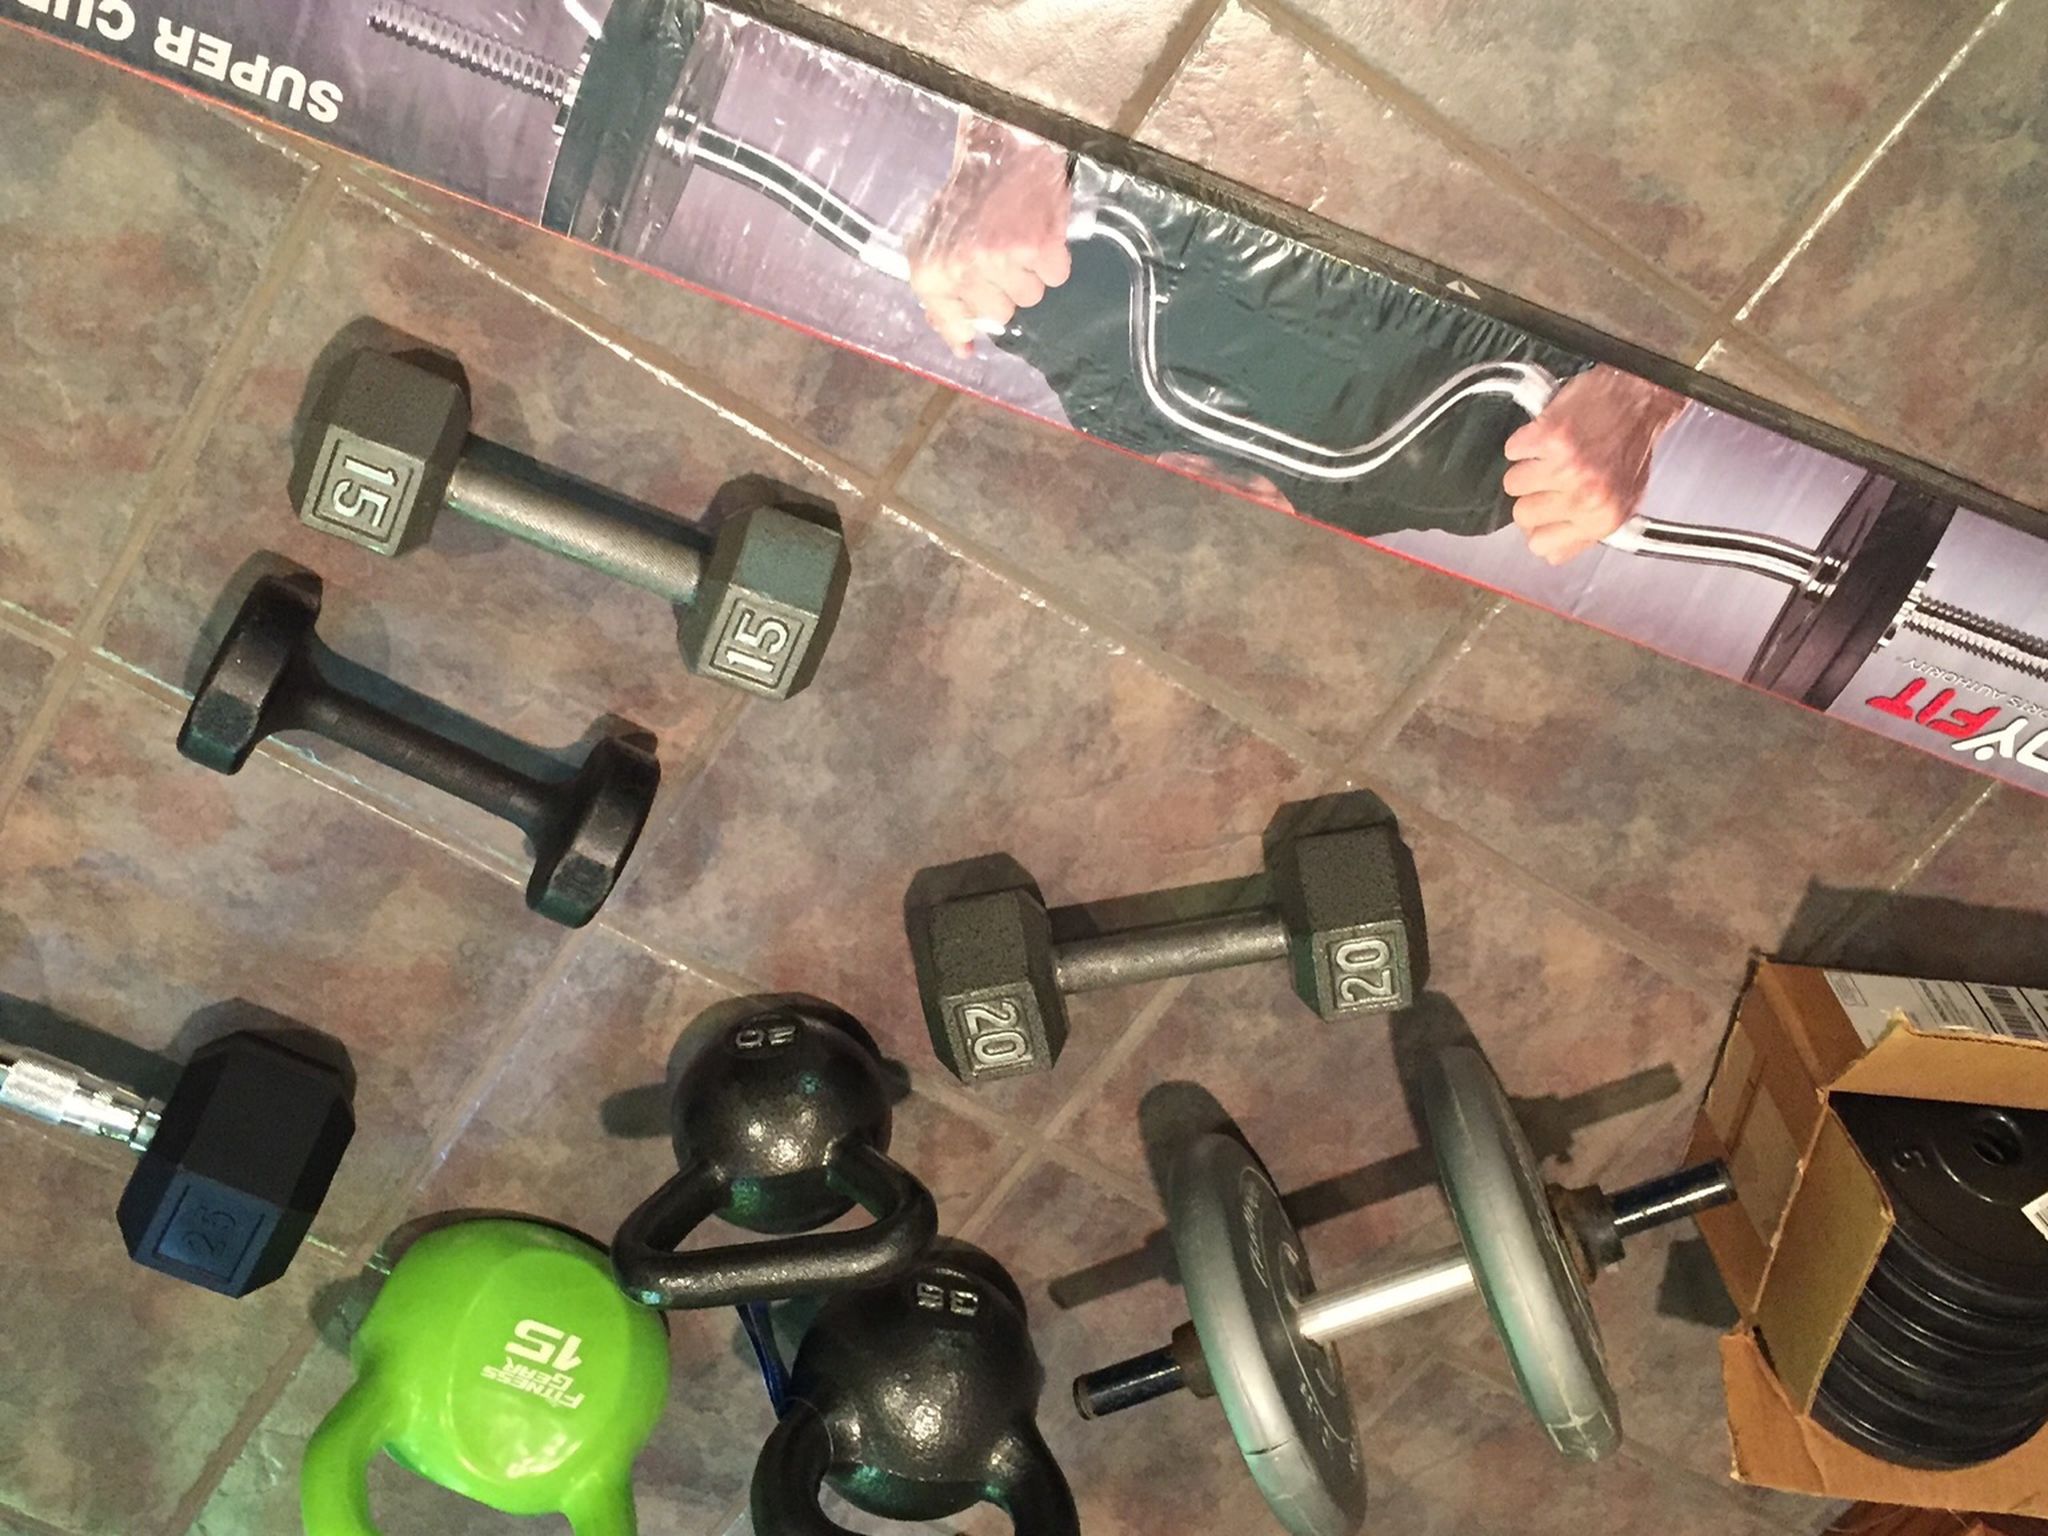 Weights,kettle bell,and Barbell Weight Bar Some Never Used.